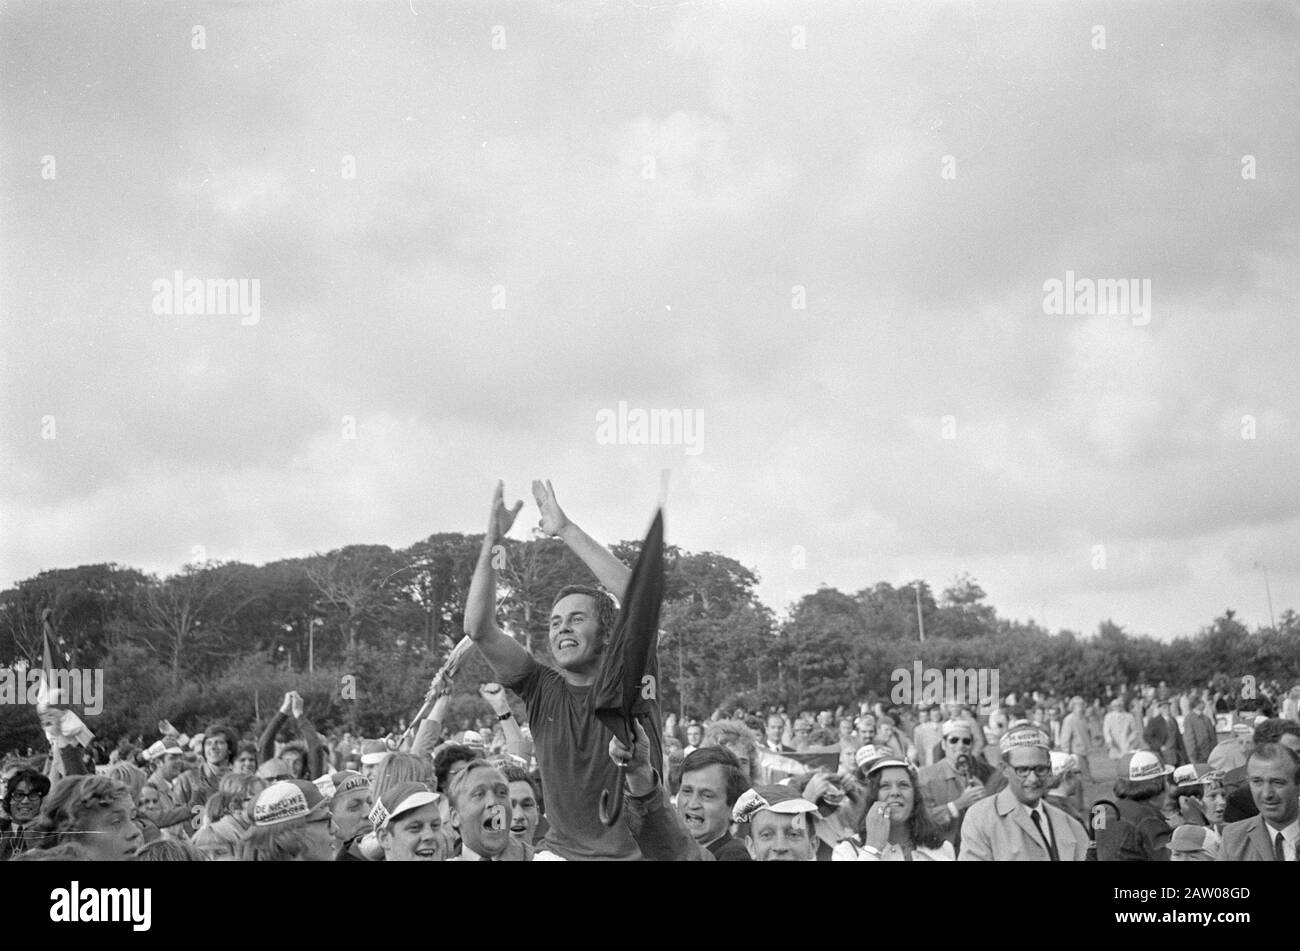 Dutch Football Championship for Sunday Amateurs 1971  After the victory in the match RVC - VV Caesar (0-1) is a player of VV Caesar on the shoulders of supporters Date: June 19 1971 Location: Rijswijk, South Holland Keywords: champions, sports, fans, football, soccer Stock Photo